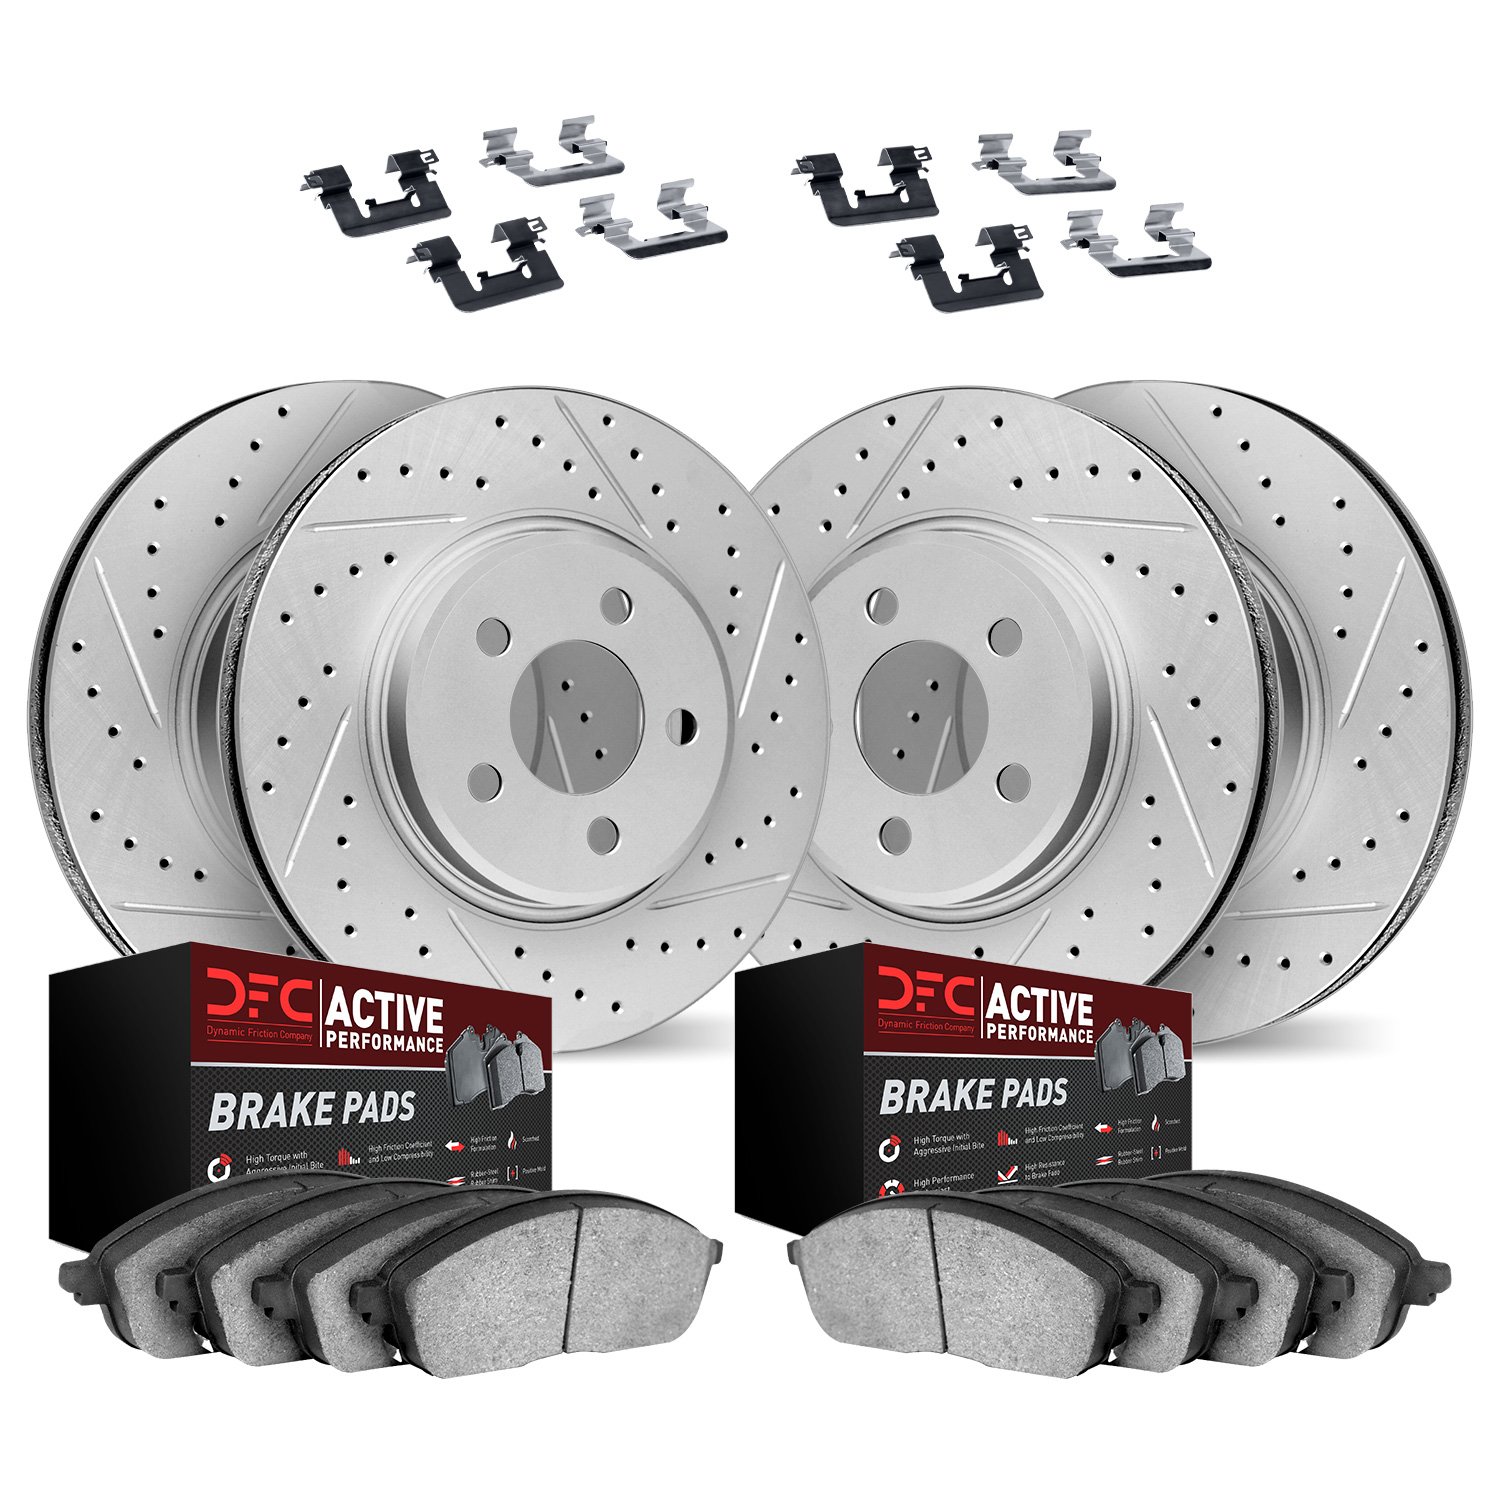 2714-67042 Geoperformance Drilled/Slotted Brake Rotors with Active Performance Pads Kit & Hardware, 2008-2013 Infiniti/Nissan, P